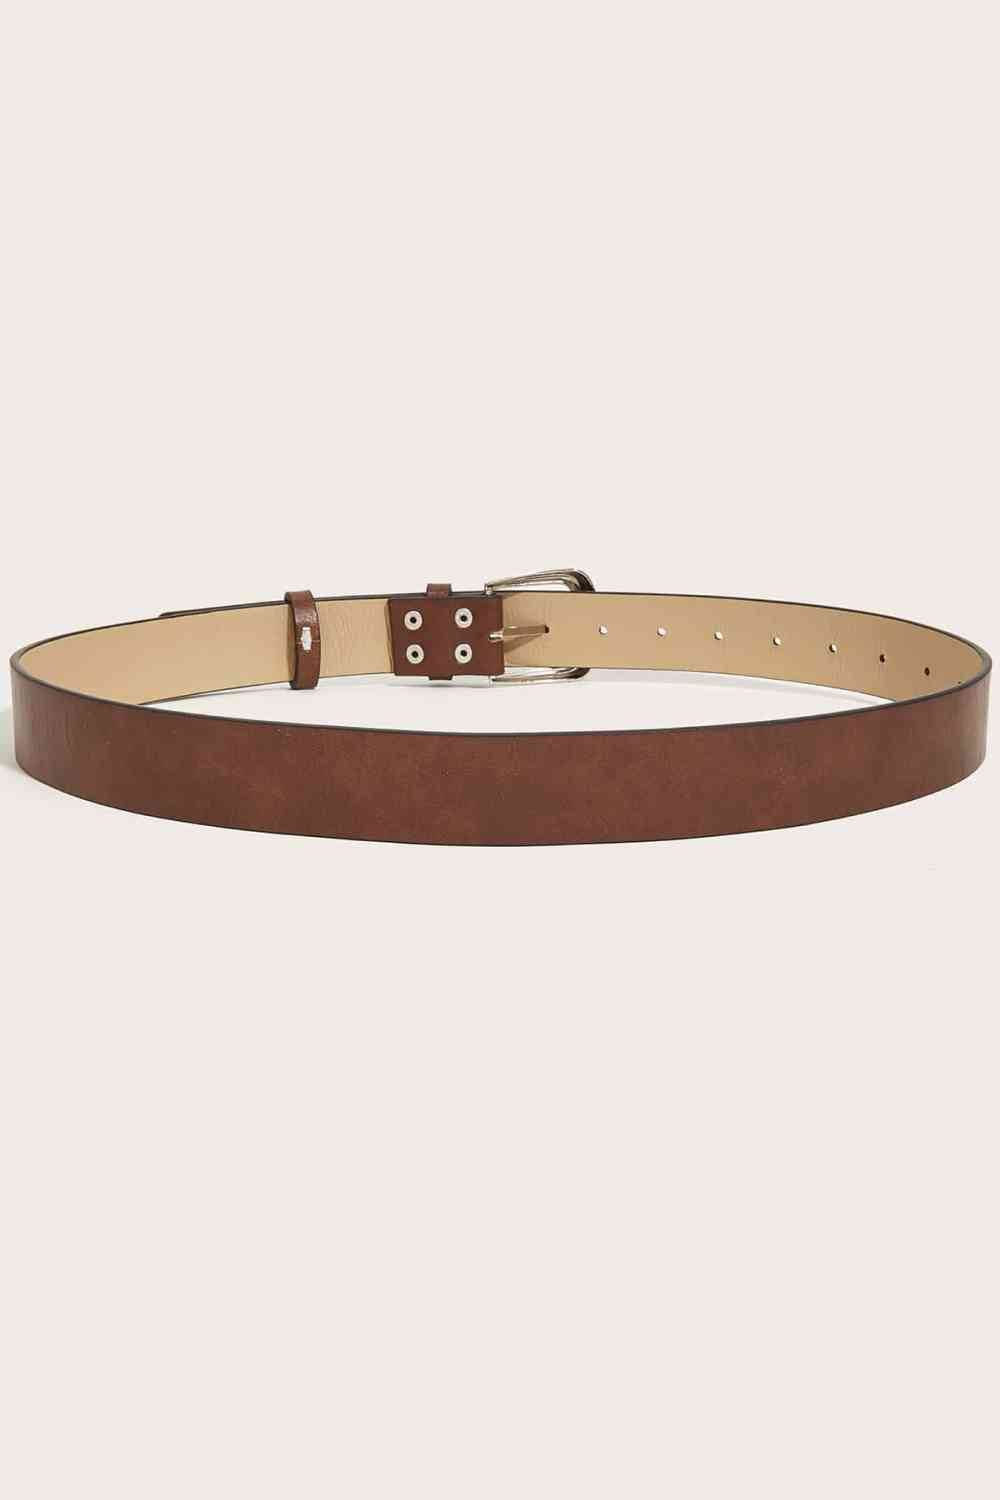 Basic Brown Belt With Silver Buckle